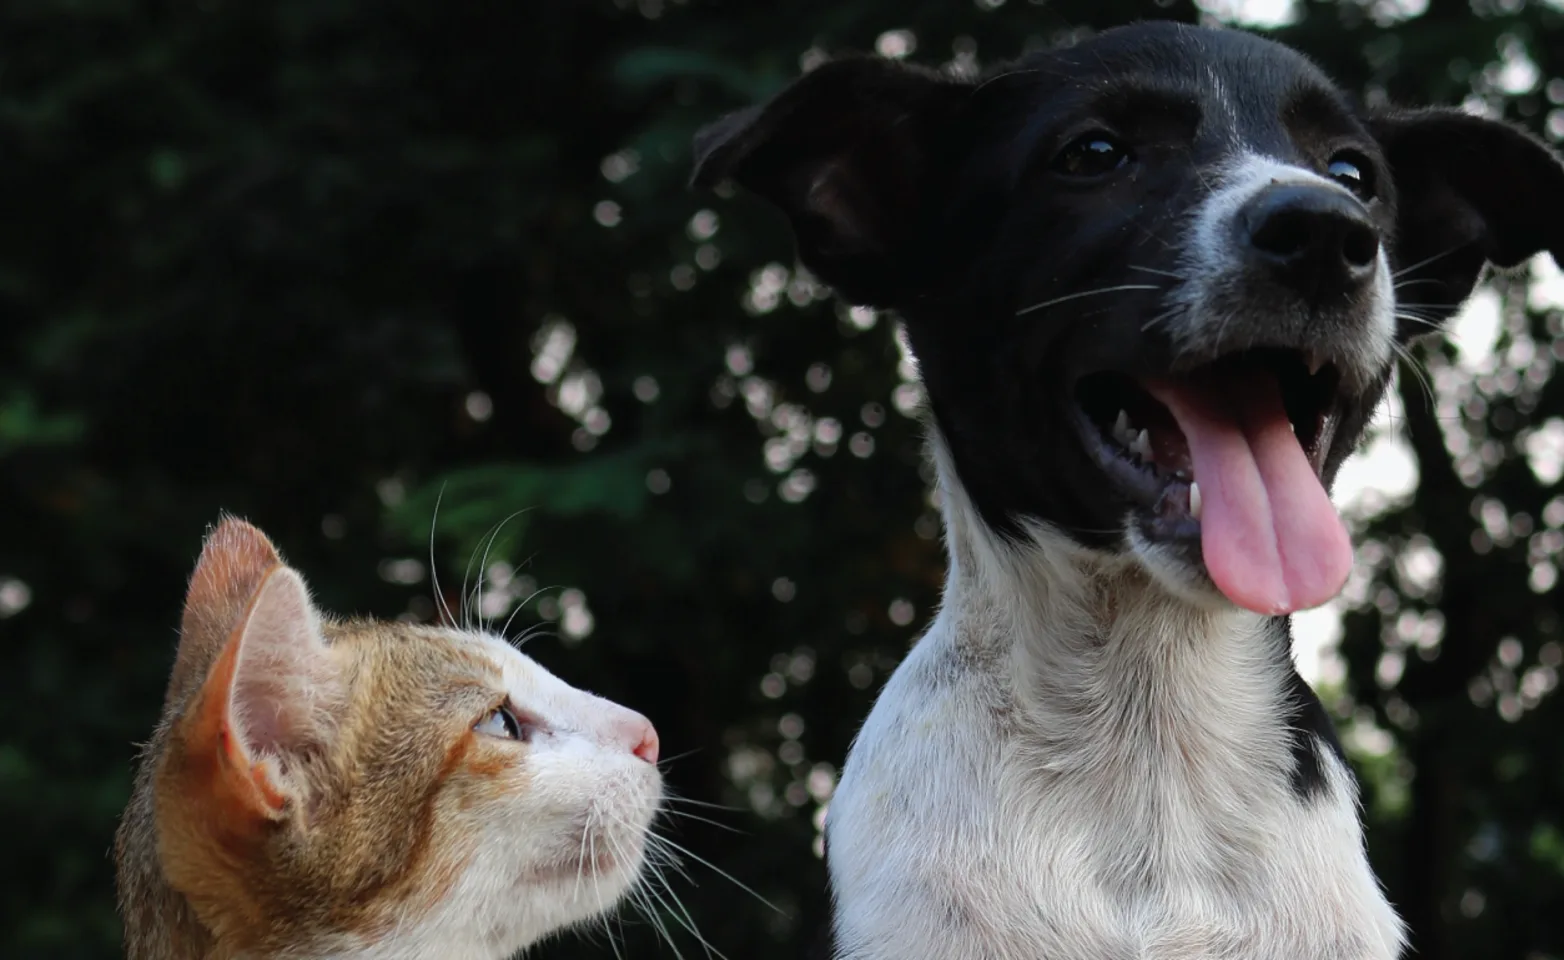 Cat looking at a happy dog.